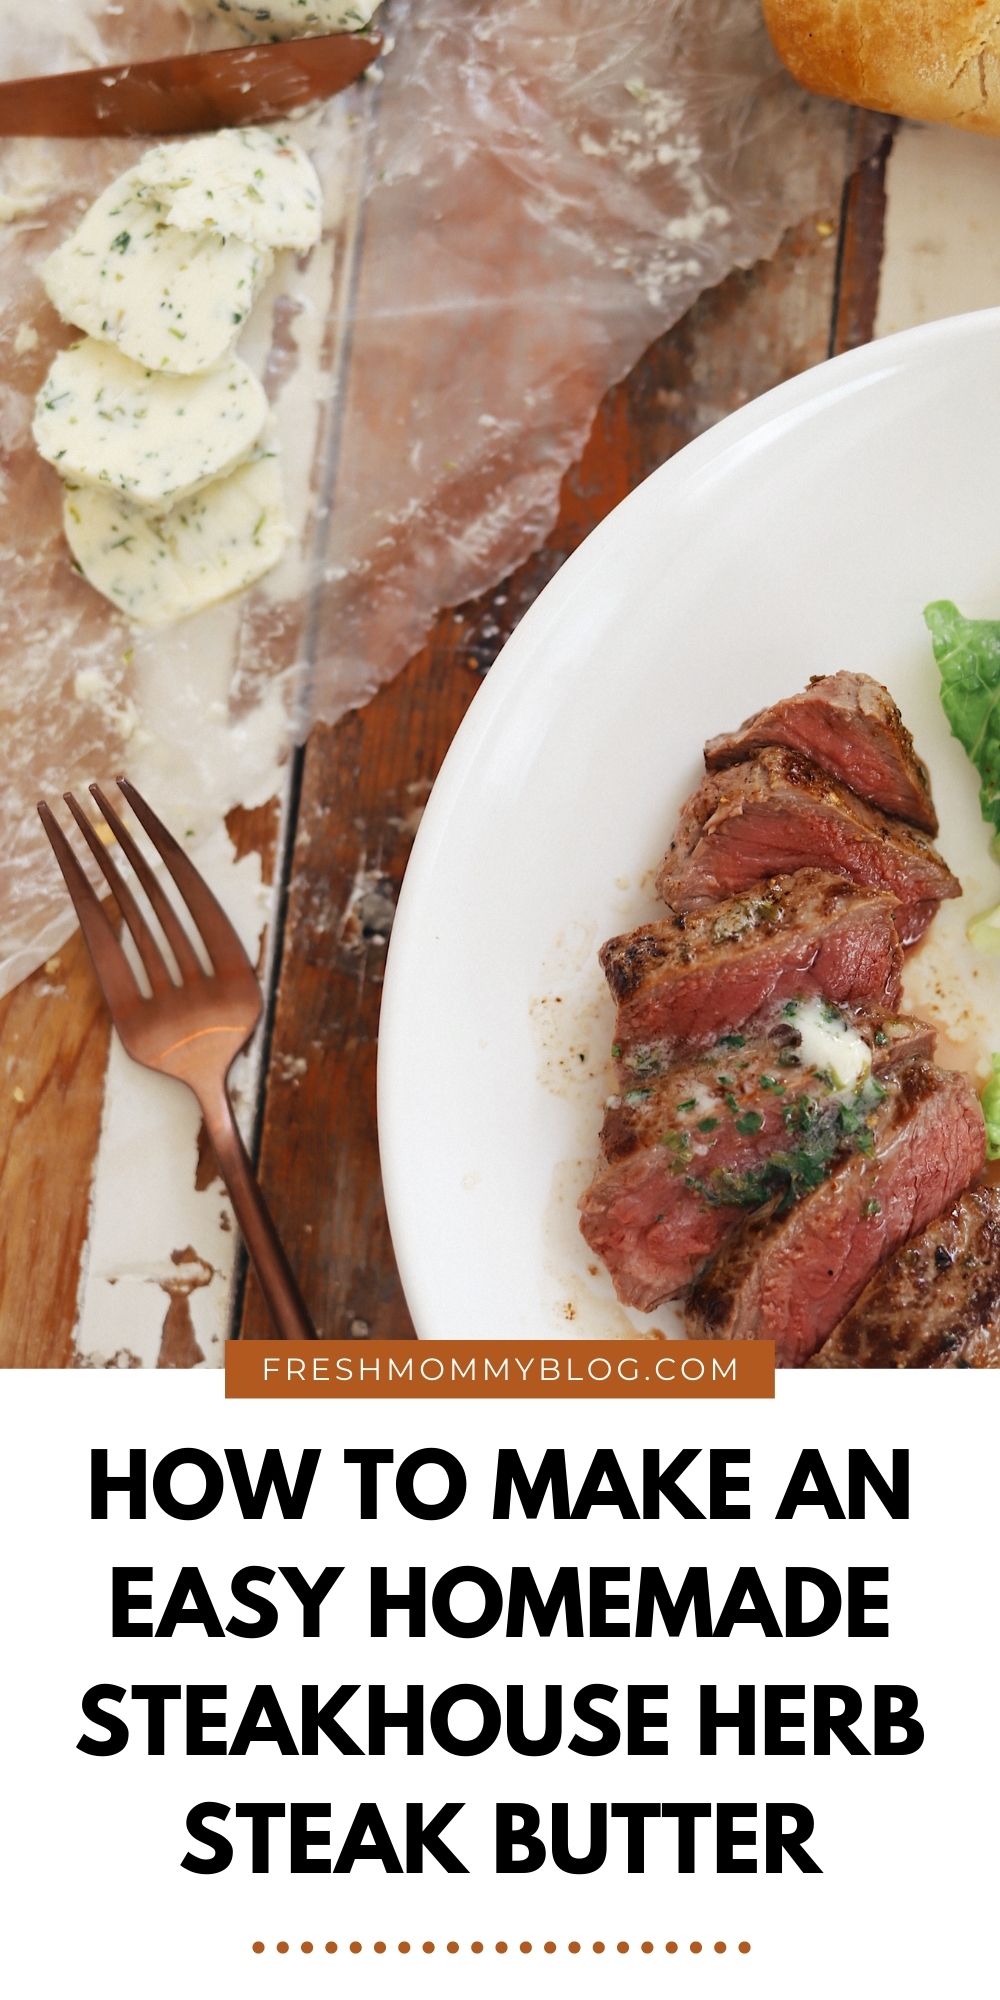 Homemade Steak Butter: How to Make an Easy Steakhouse Herb Butter for Steak | Steak Butter by popular Florida lifestyle blog, Fresh Mommy Blog: image of slices pieces of steak with melted steak butter on top. 